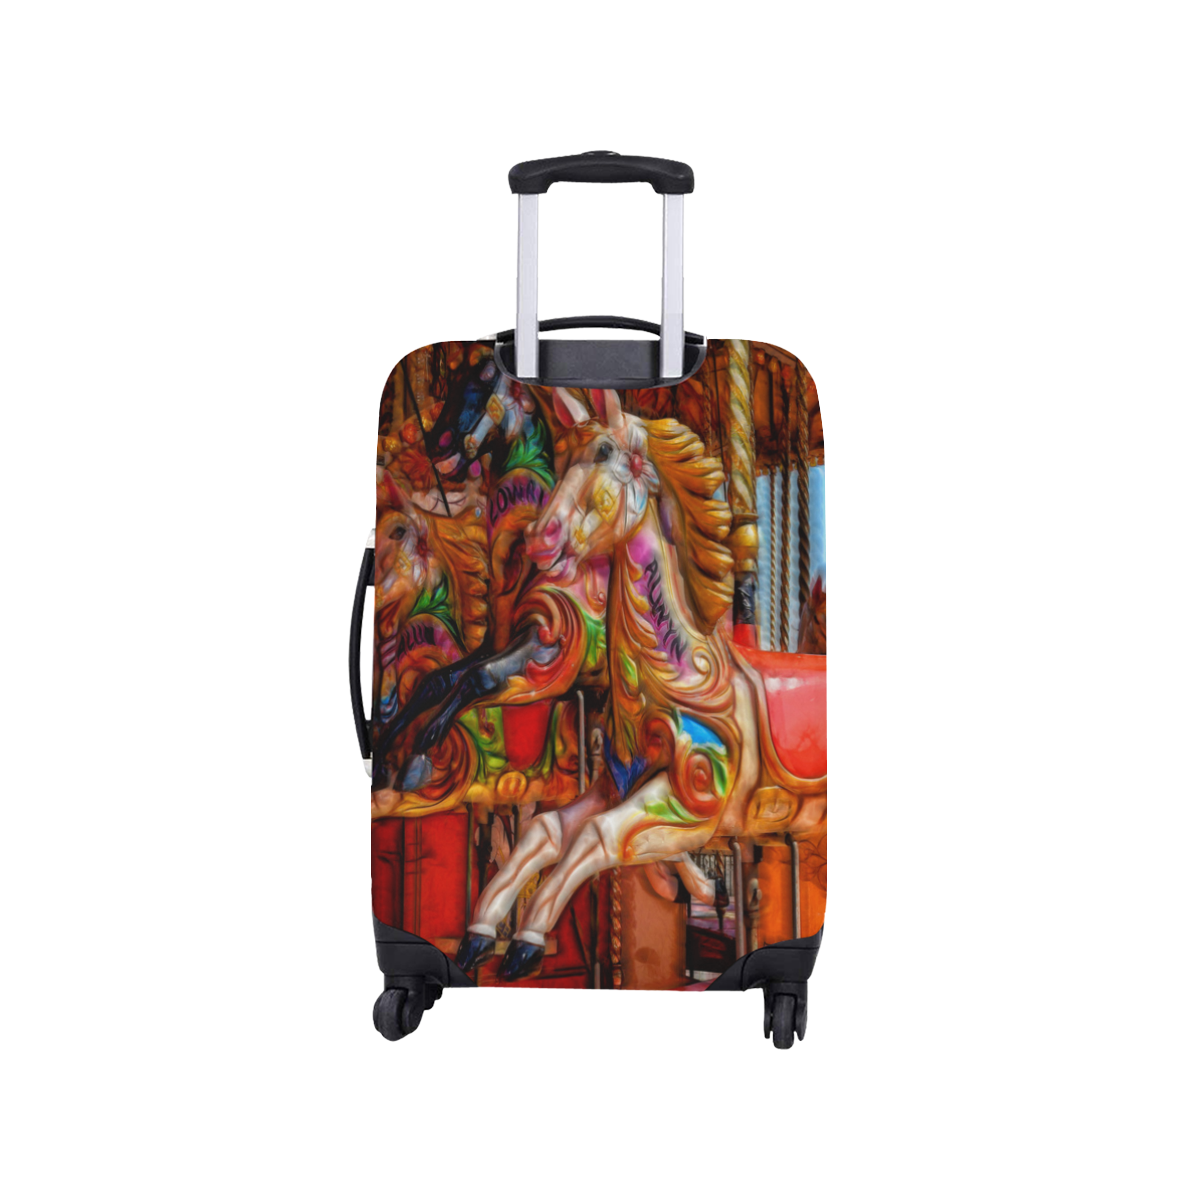 Take A Ride On The Merry-go-round Luggage Cover/Small 18"-21"